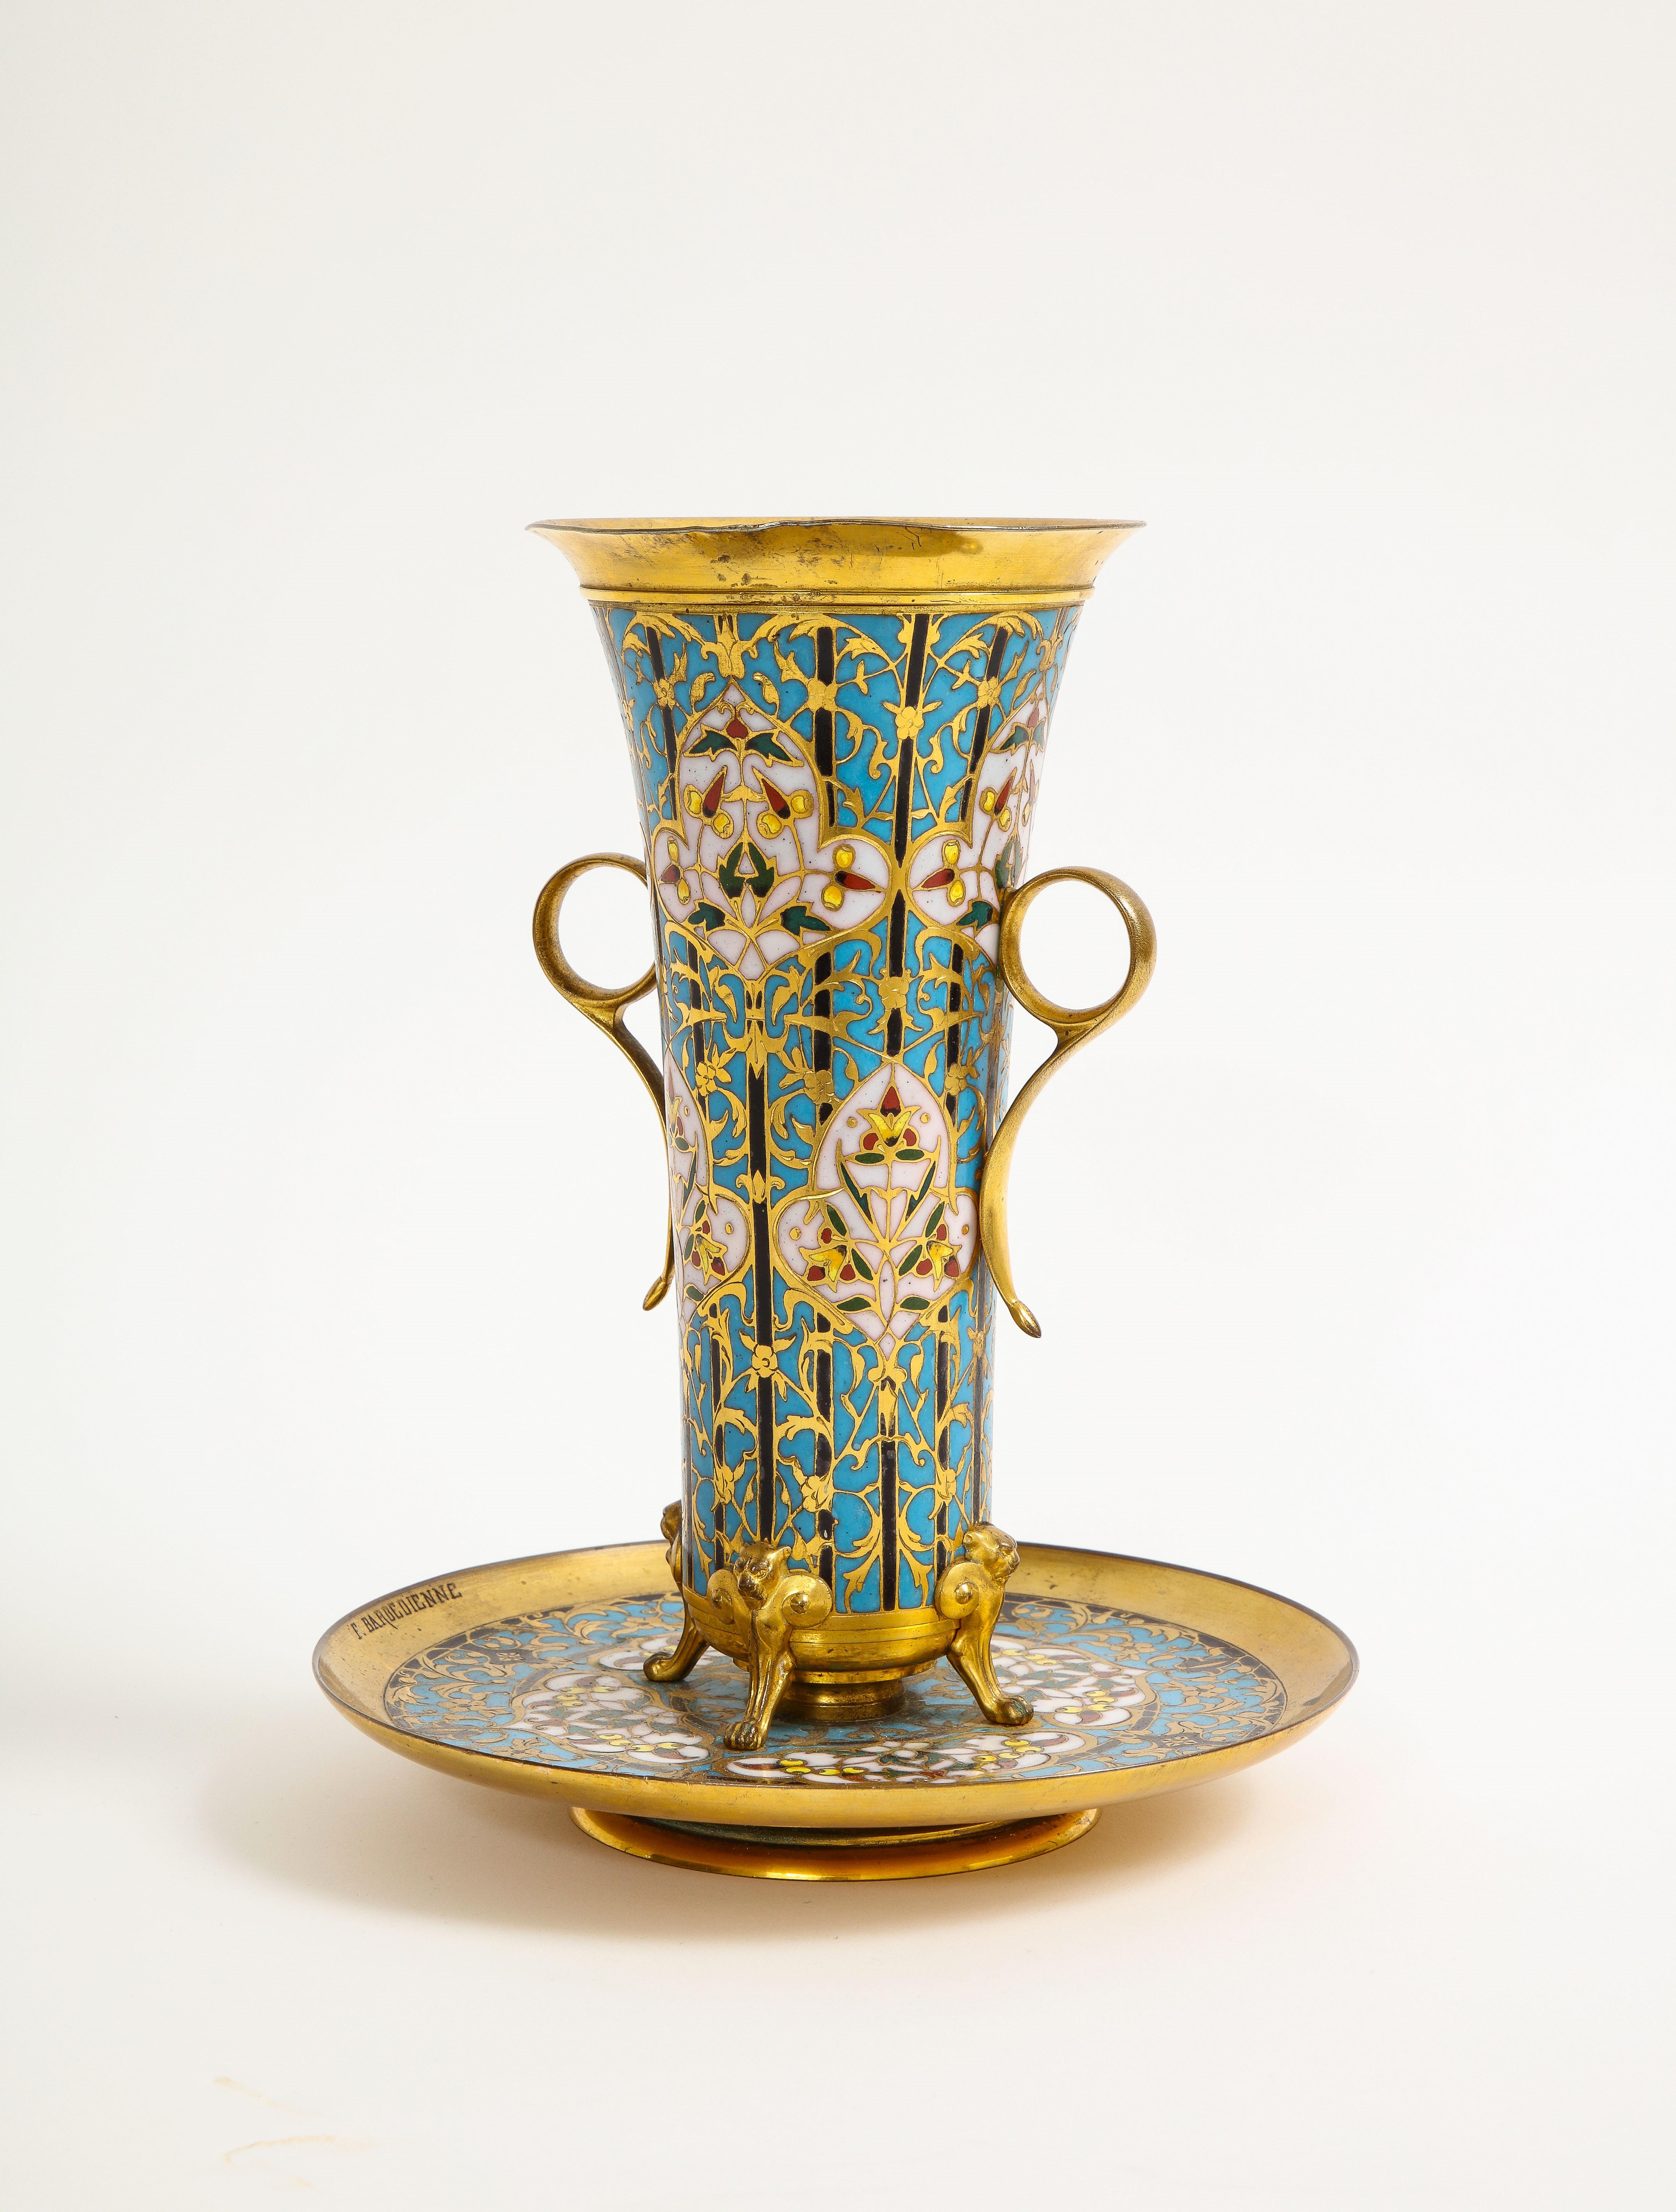 Mid-19th Century 19th C. French Islamic Champleve Enamel Vase and Underplate, Signed Barbedienne For Sale